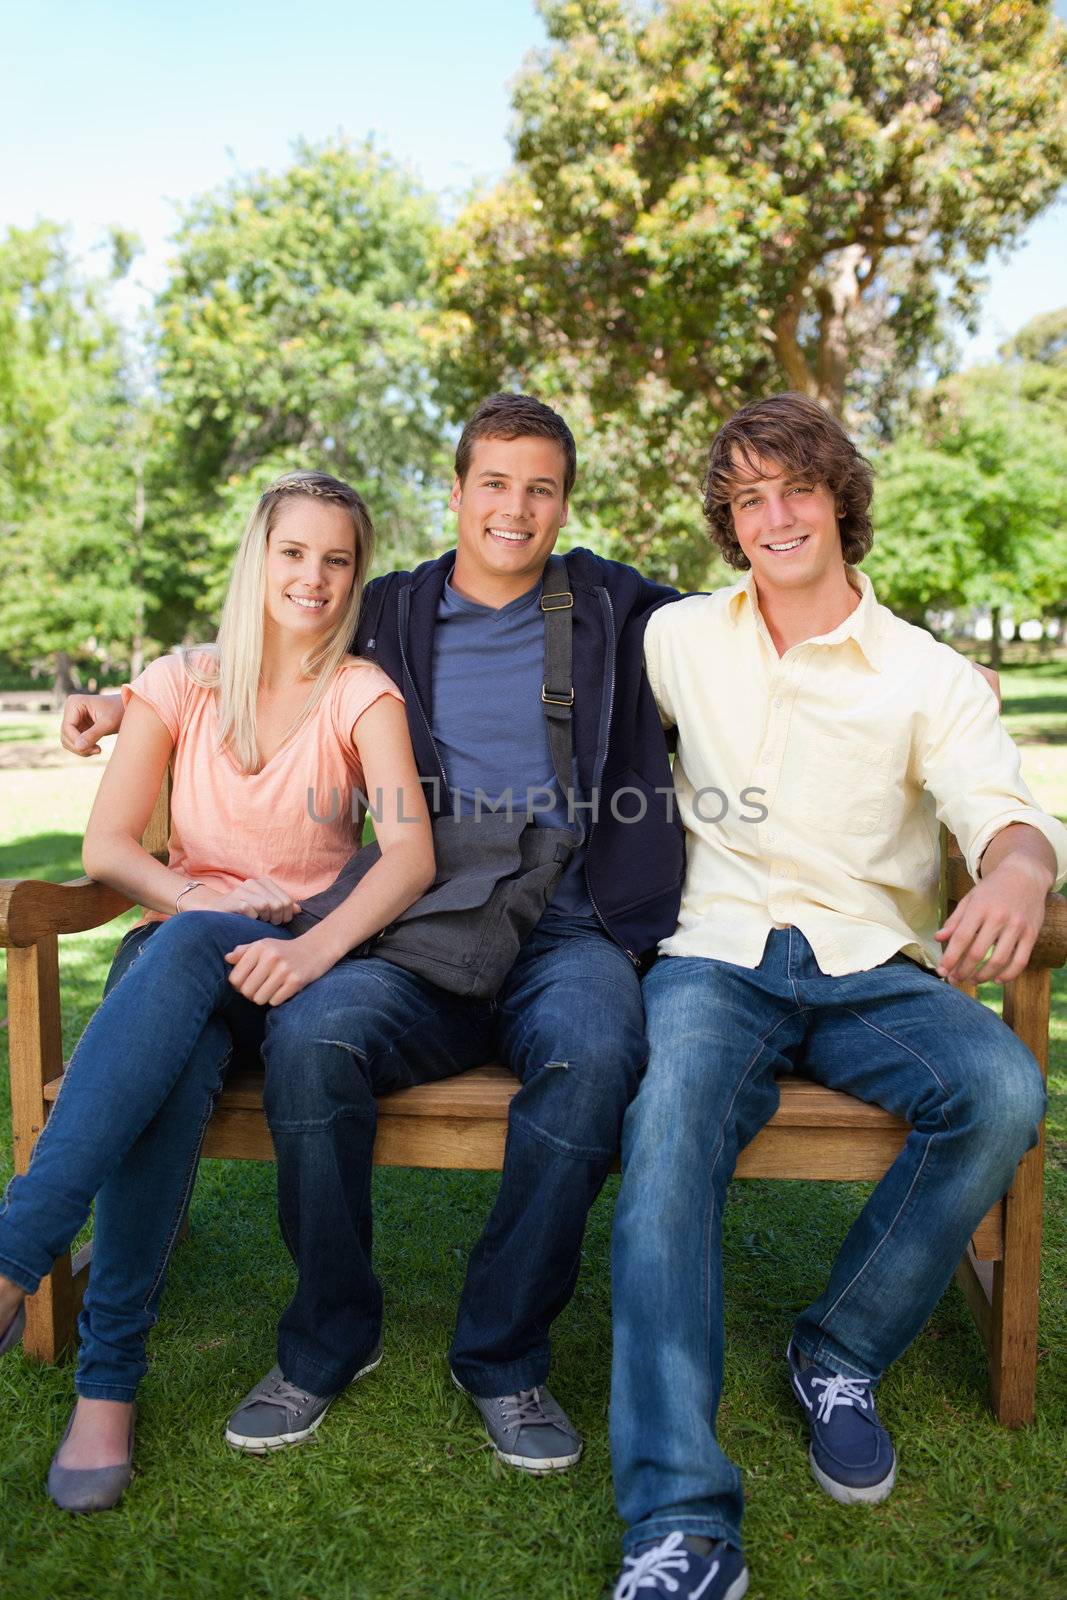 Three smiling students on a bench in a park together